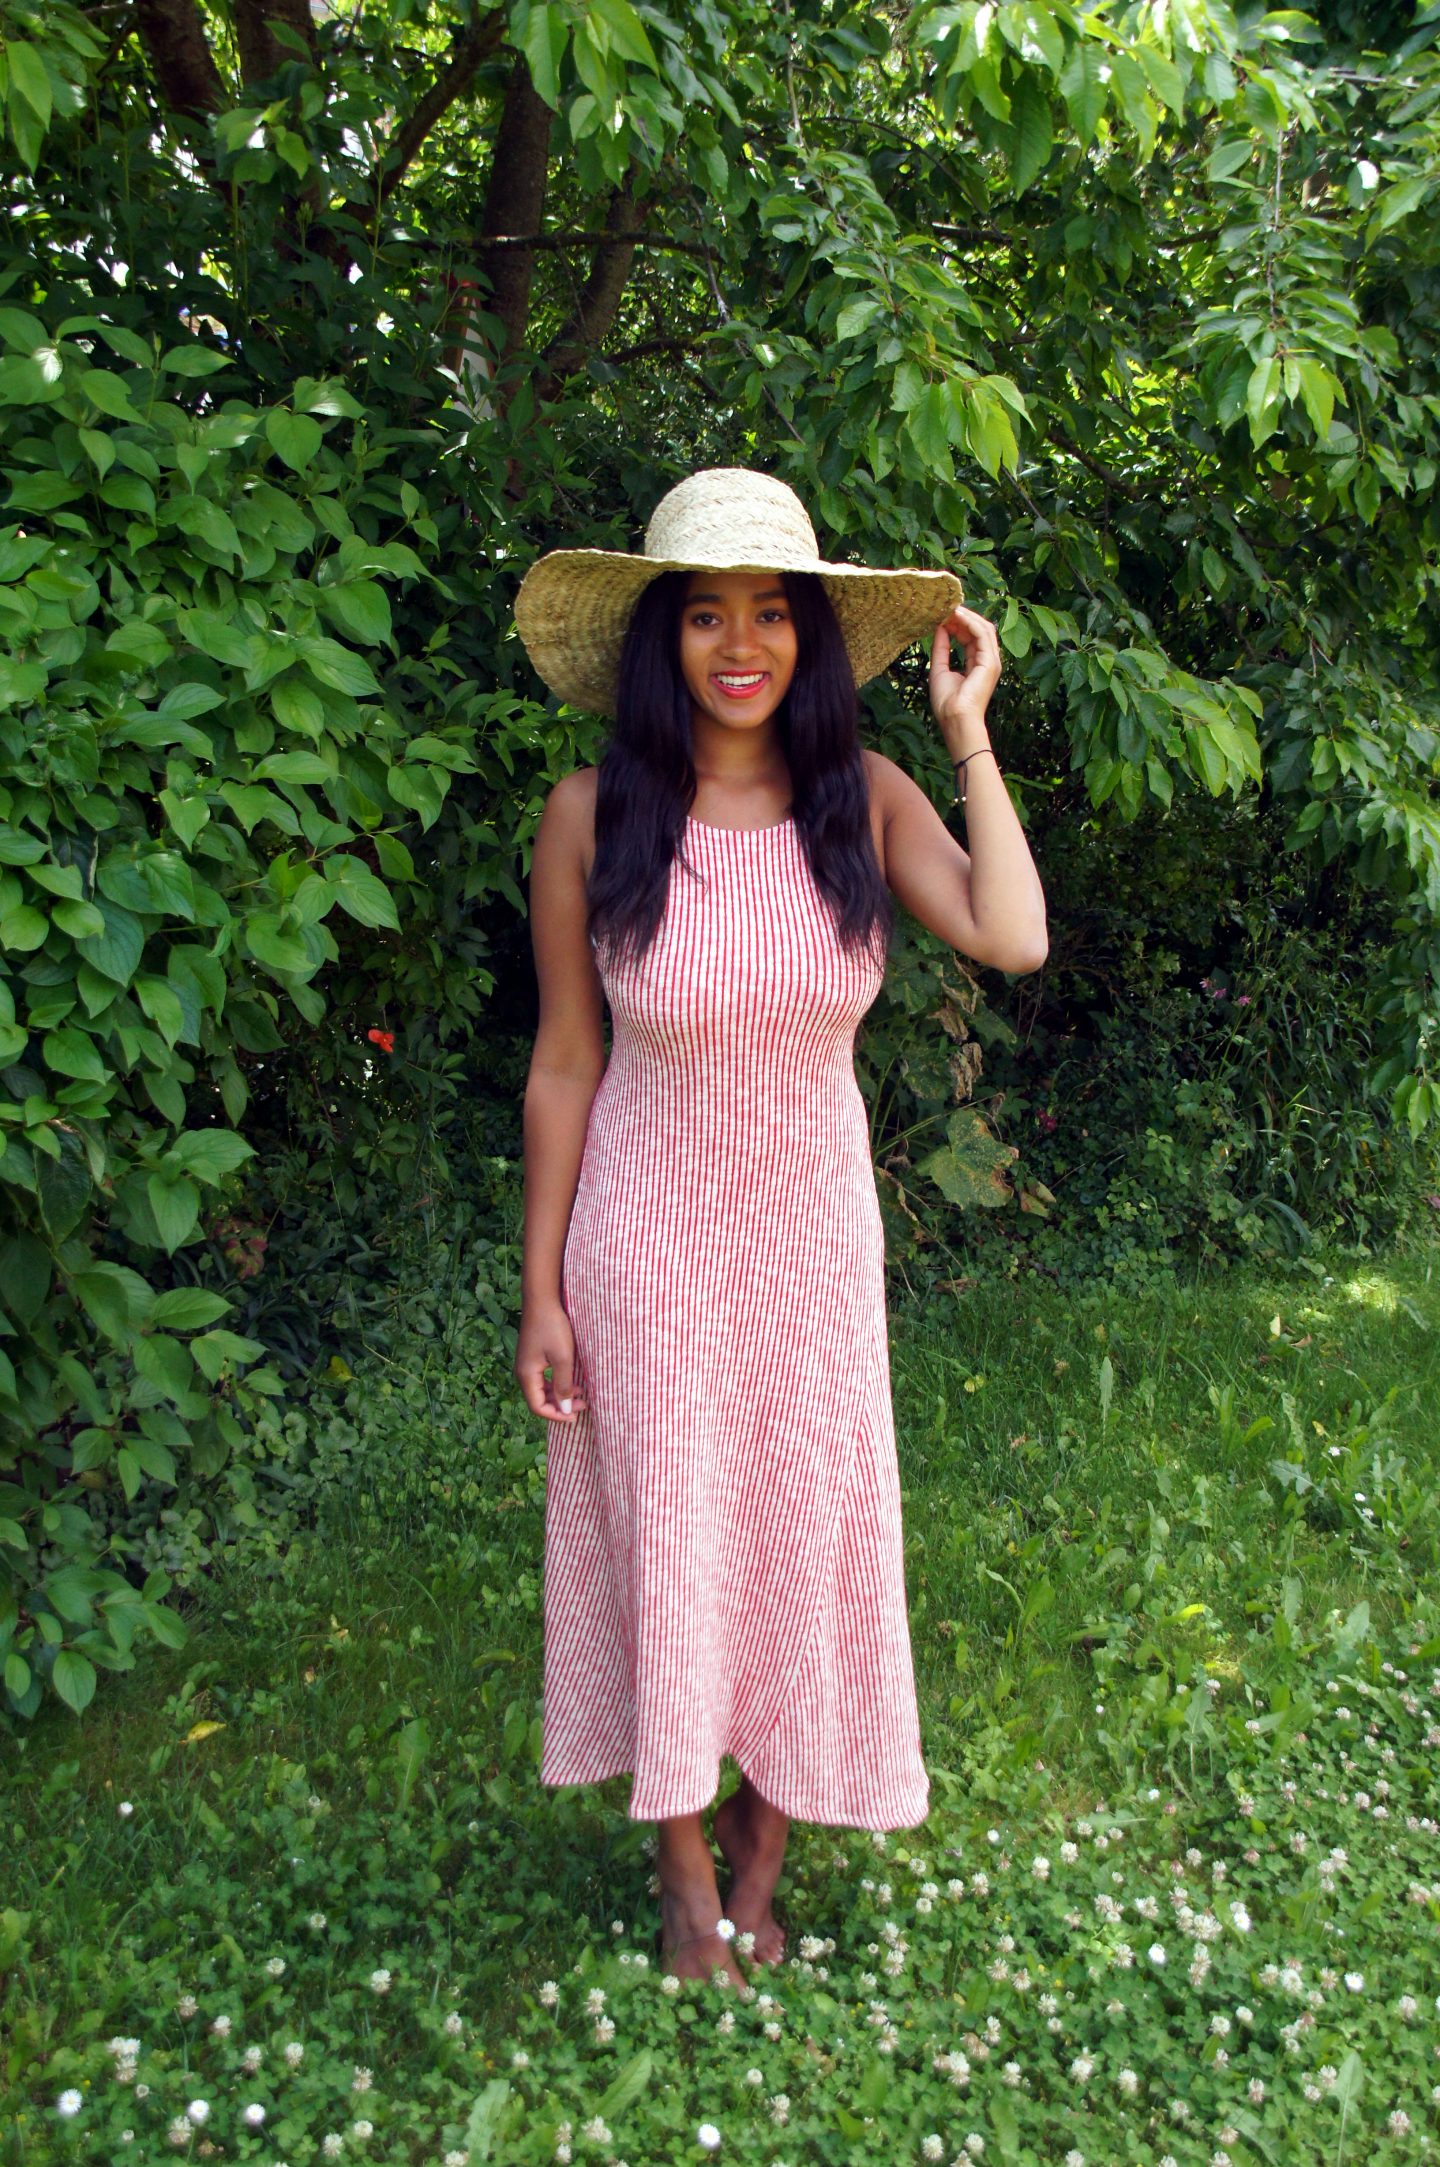 Sassy Stripes:  The Ultimative Garden Party Outfit